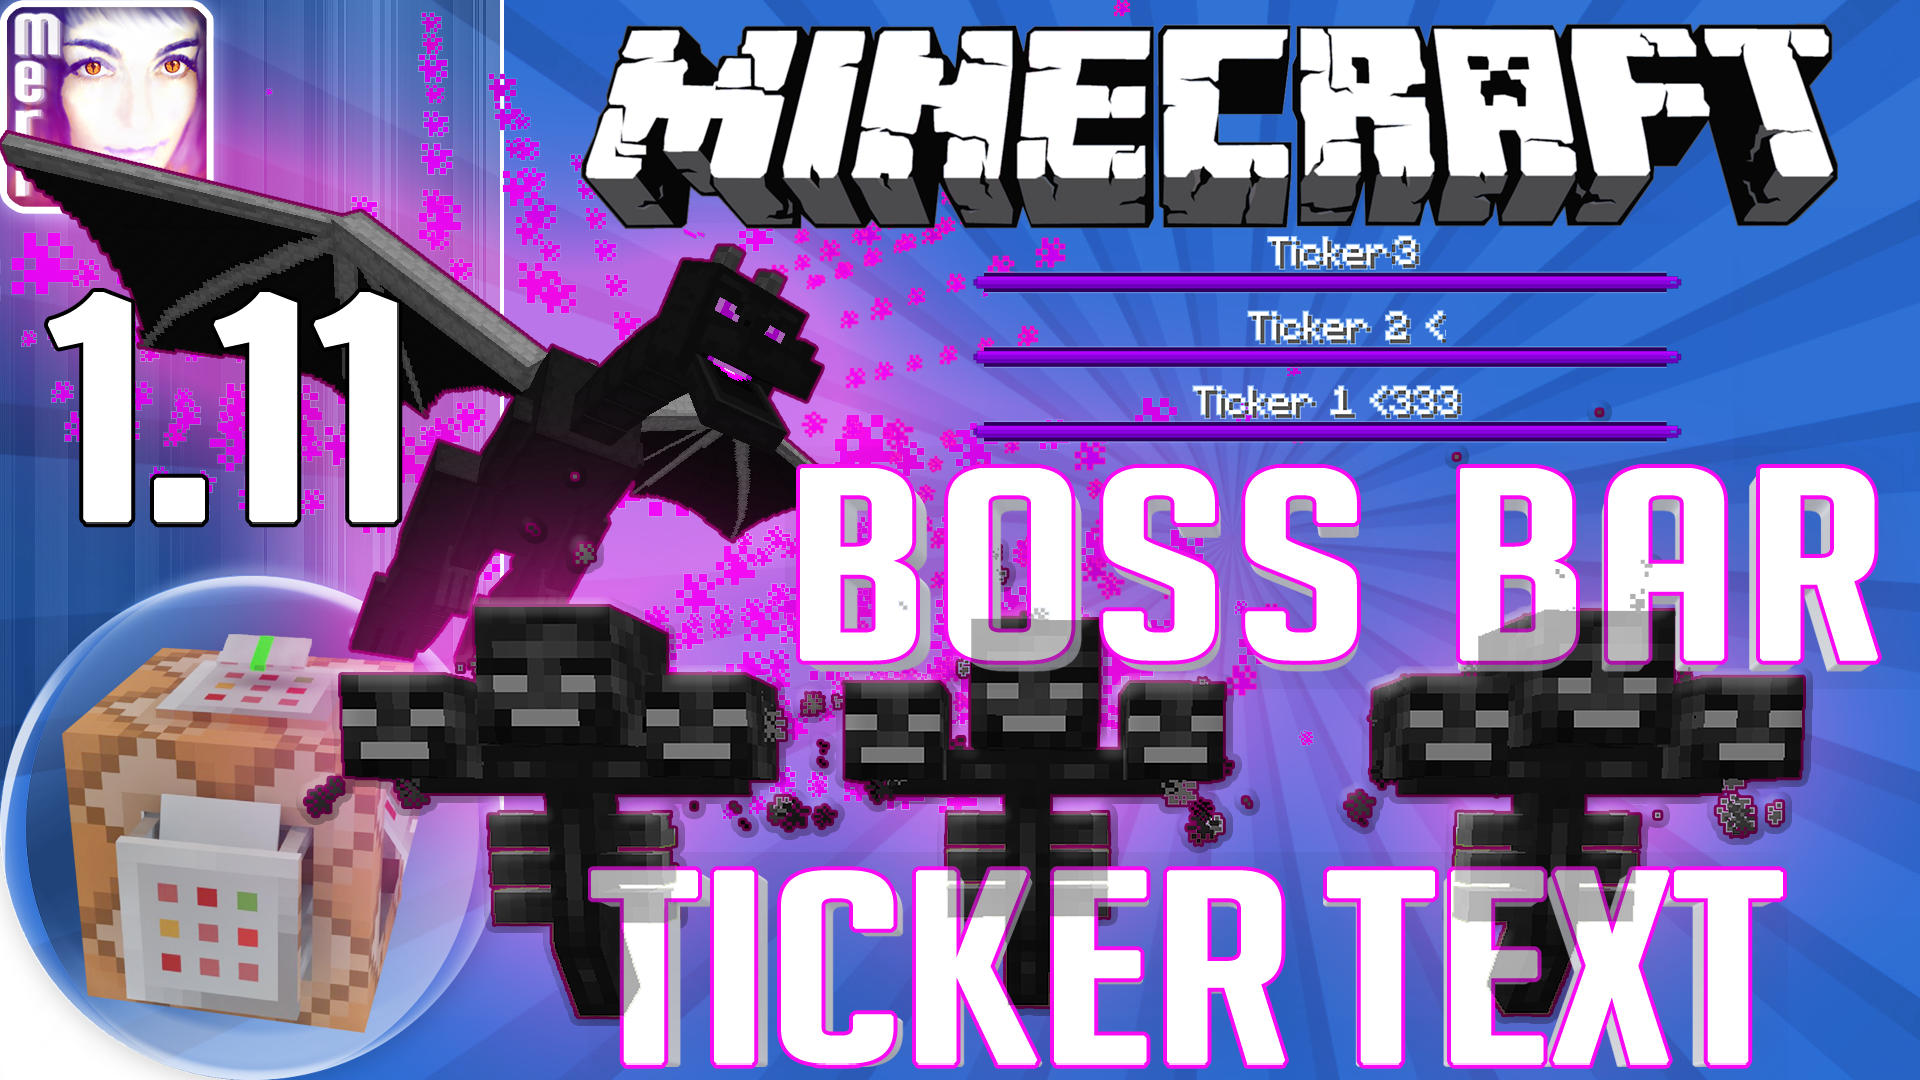 Animated Boss Bars and Ticker Text for all Mobs/entities